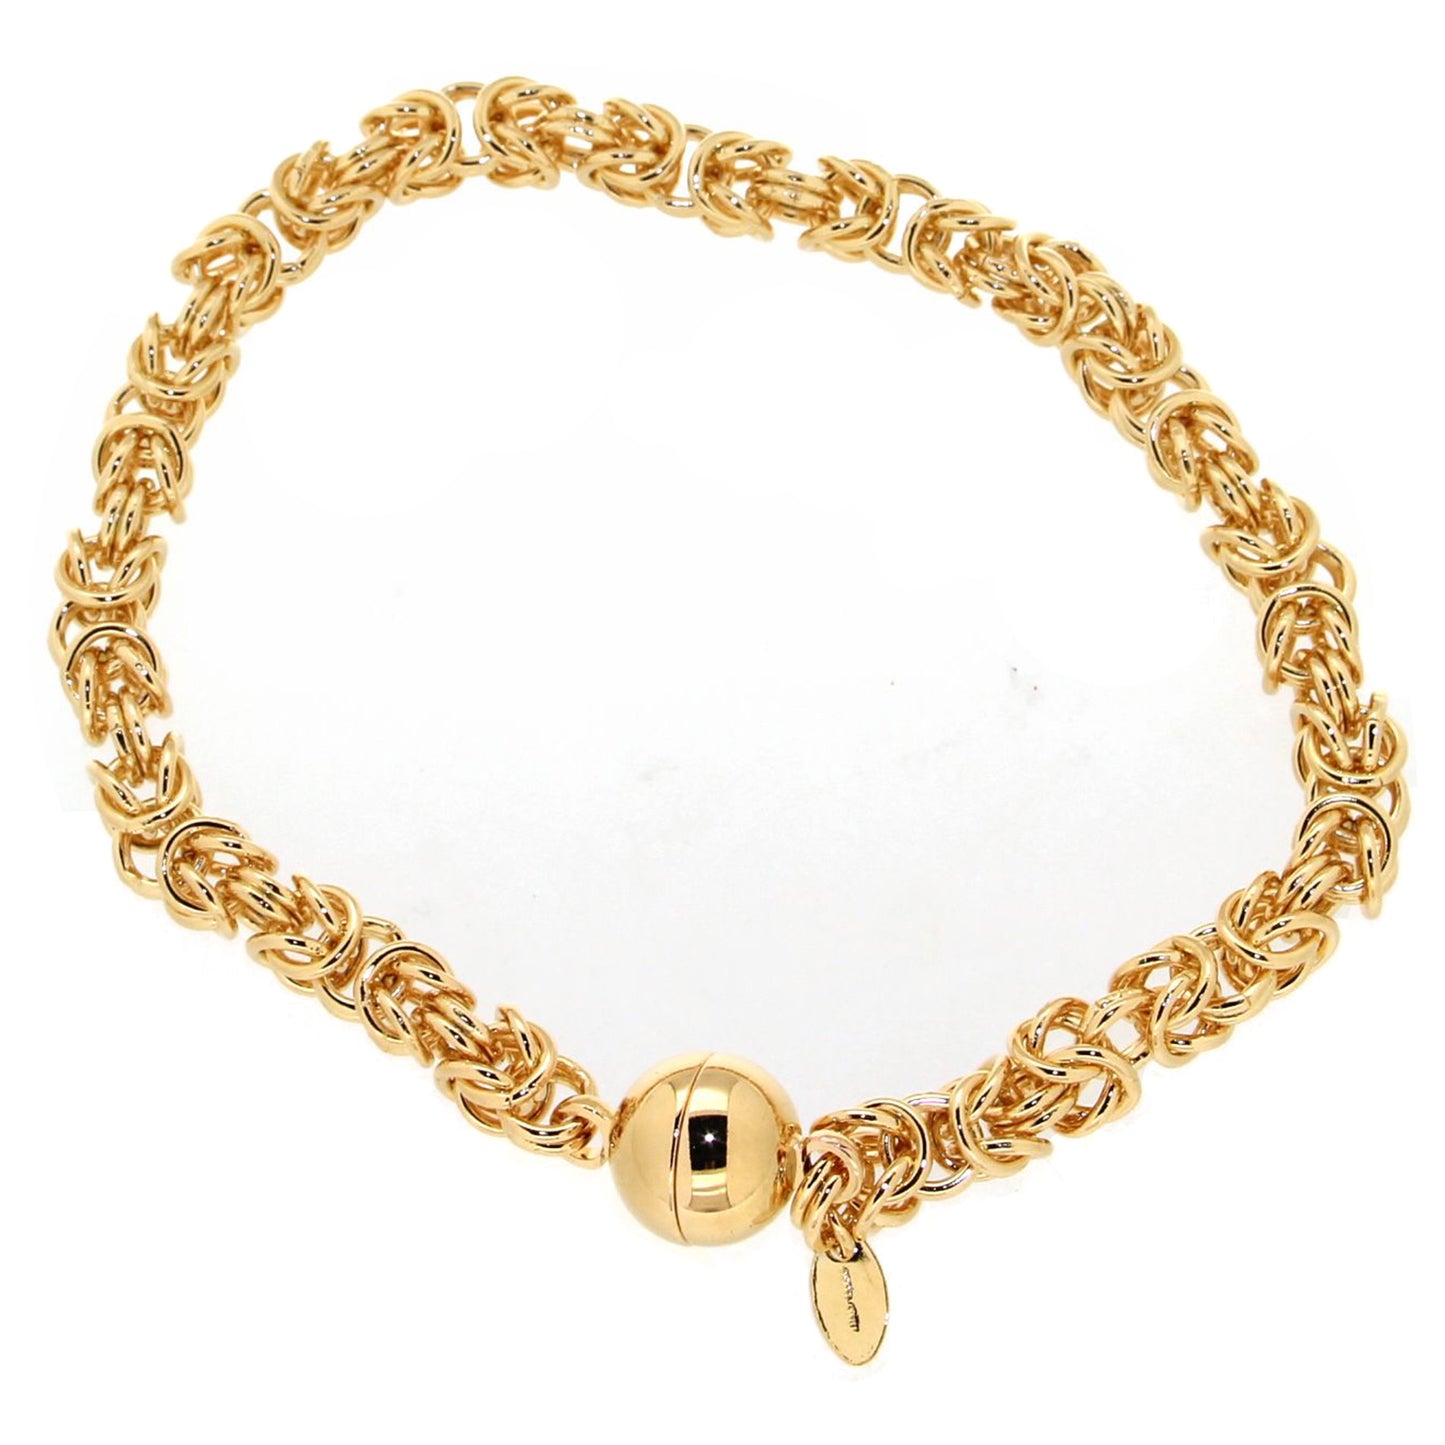 7.25" Yellow Gold Byzantine with Magnetic Clasp Bracelet